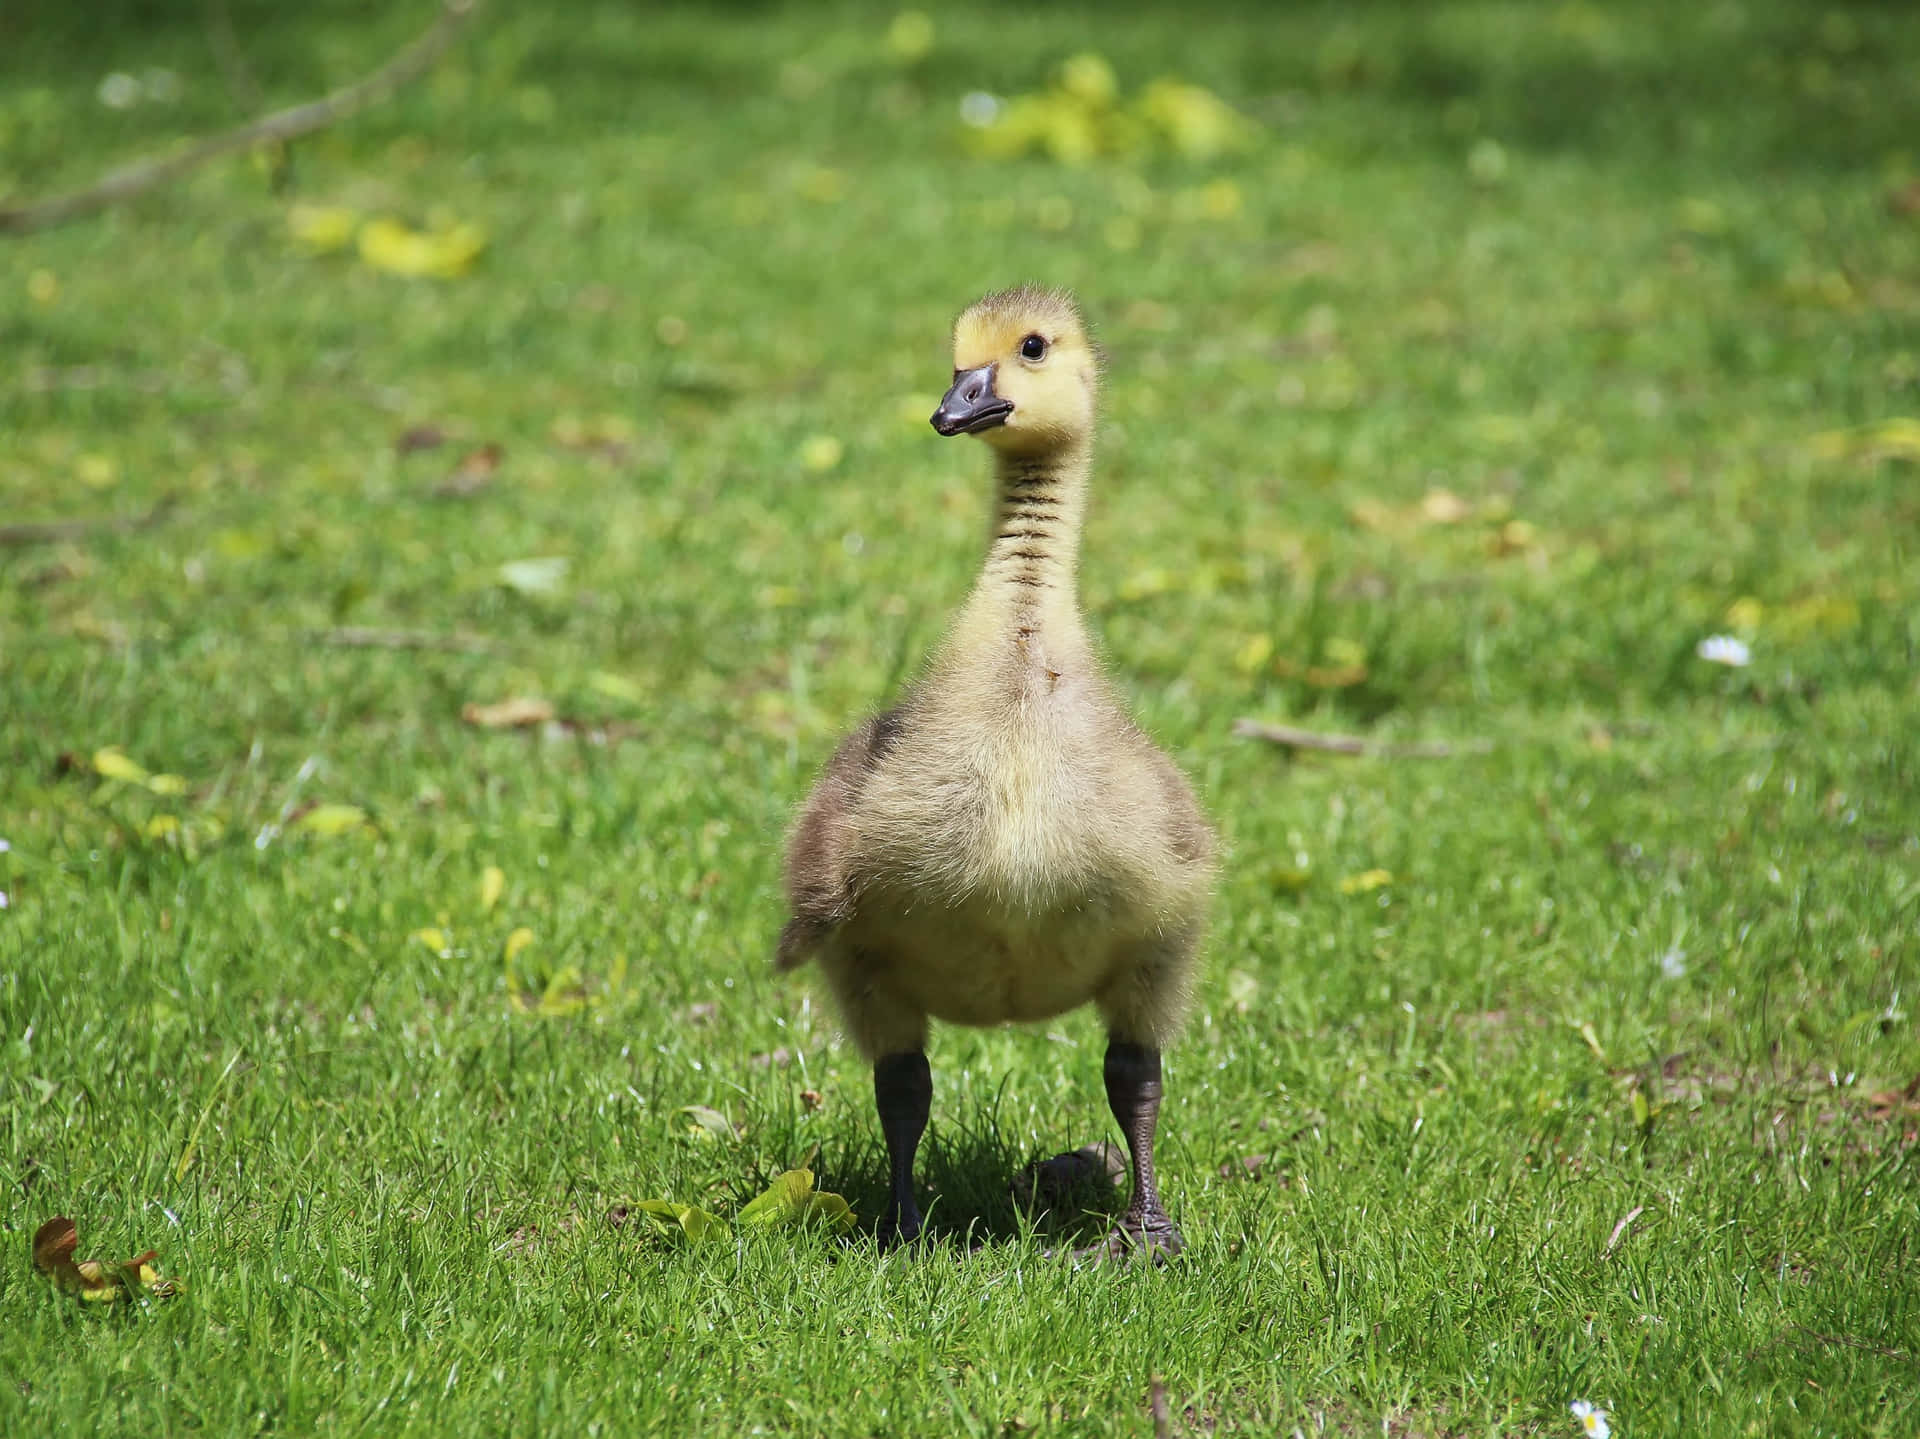 Cute Duck Wandering On The Grass Background